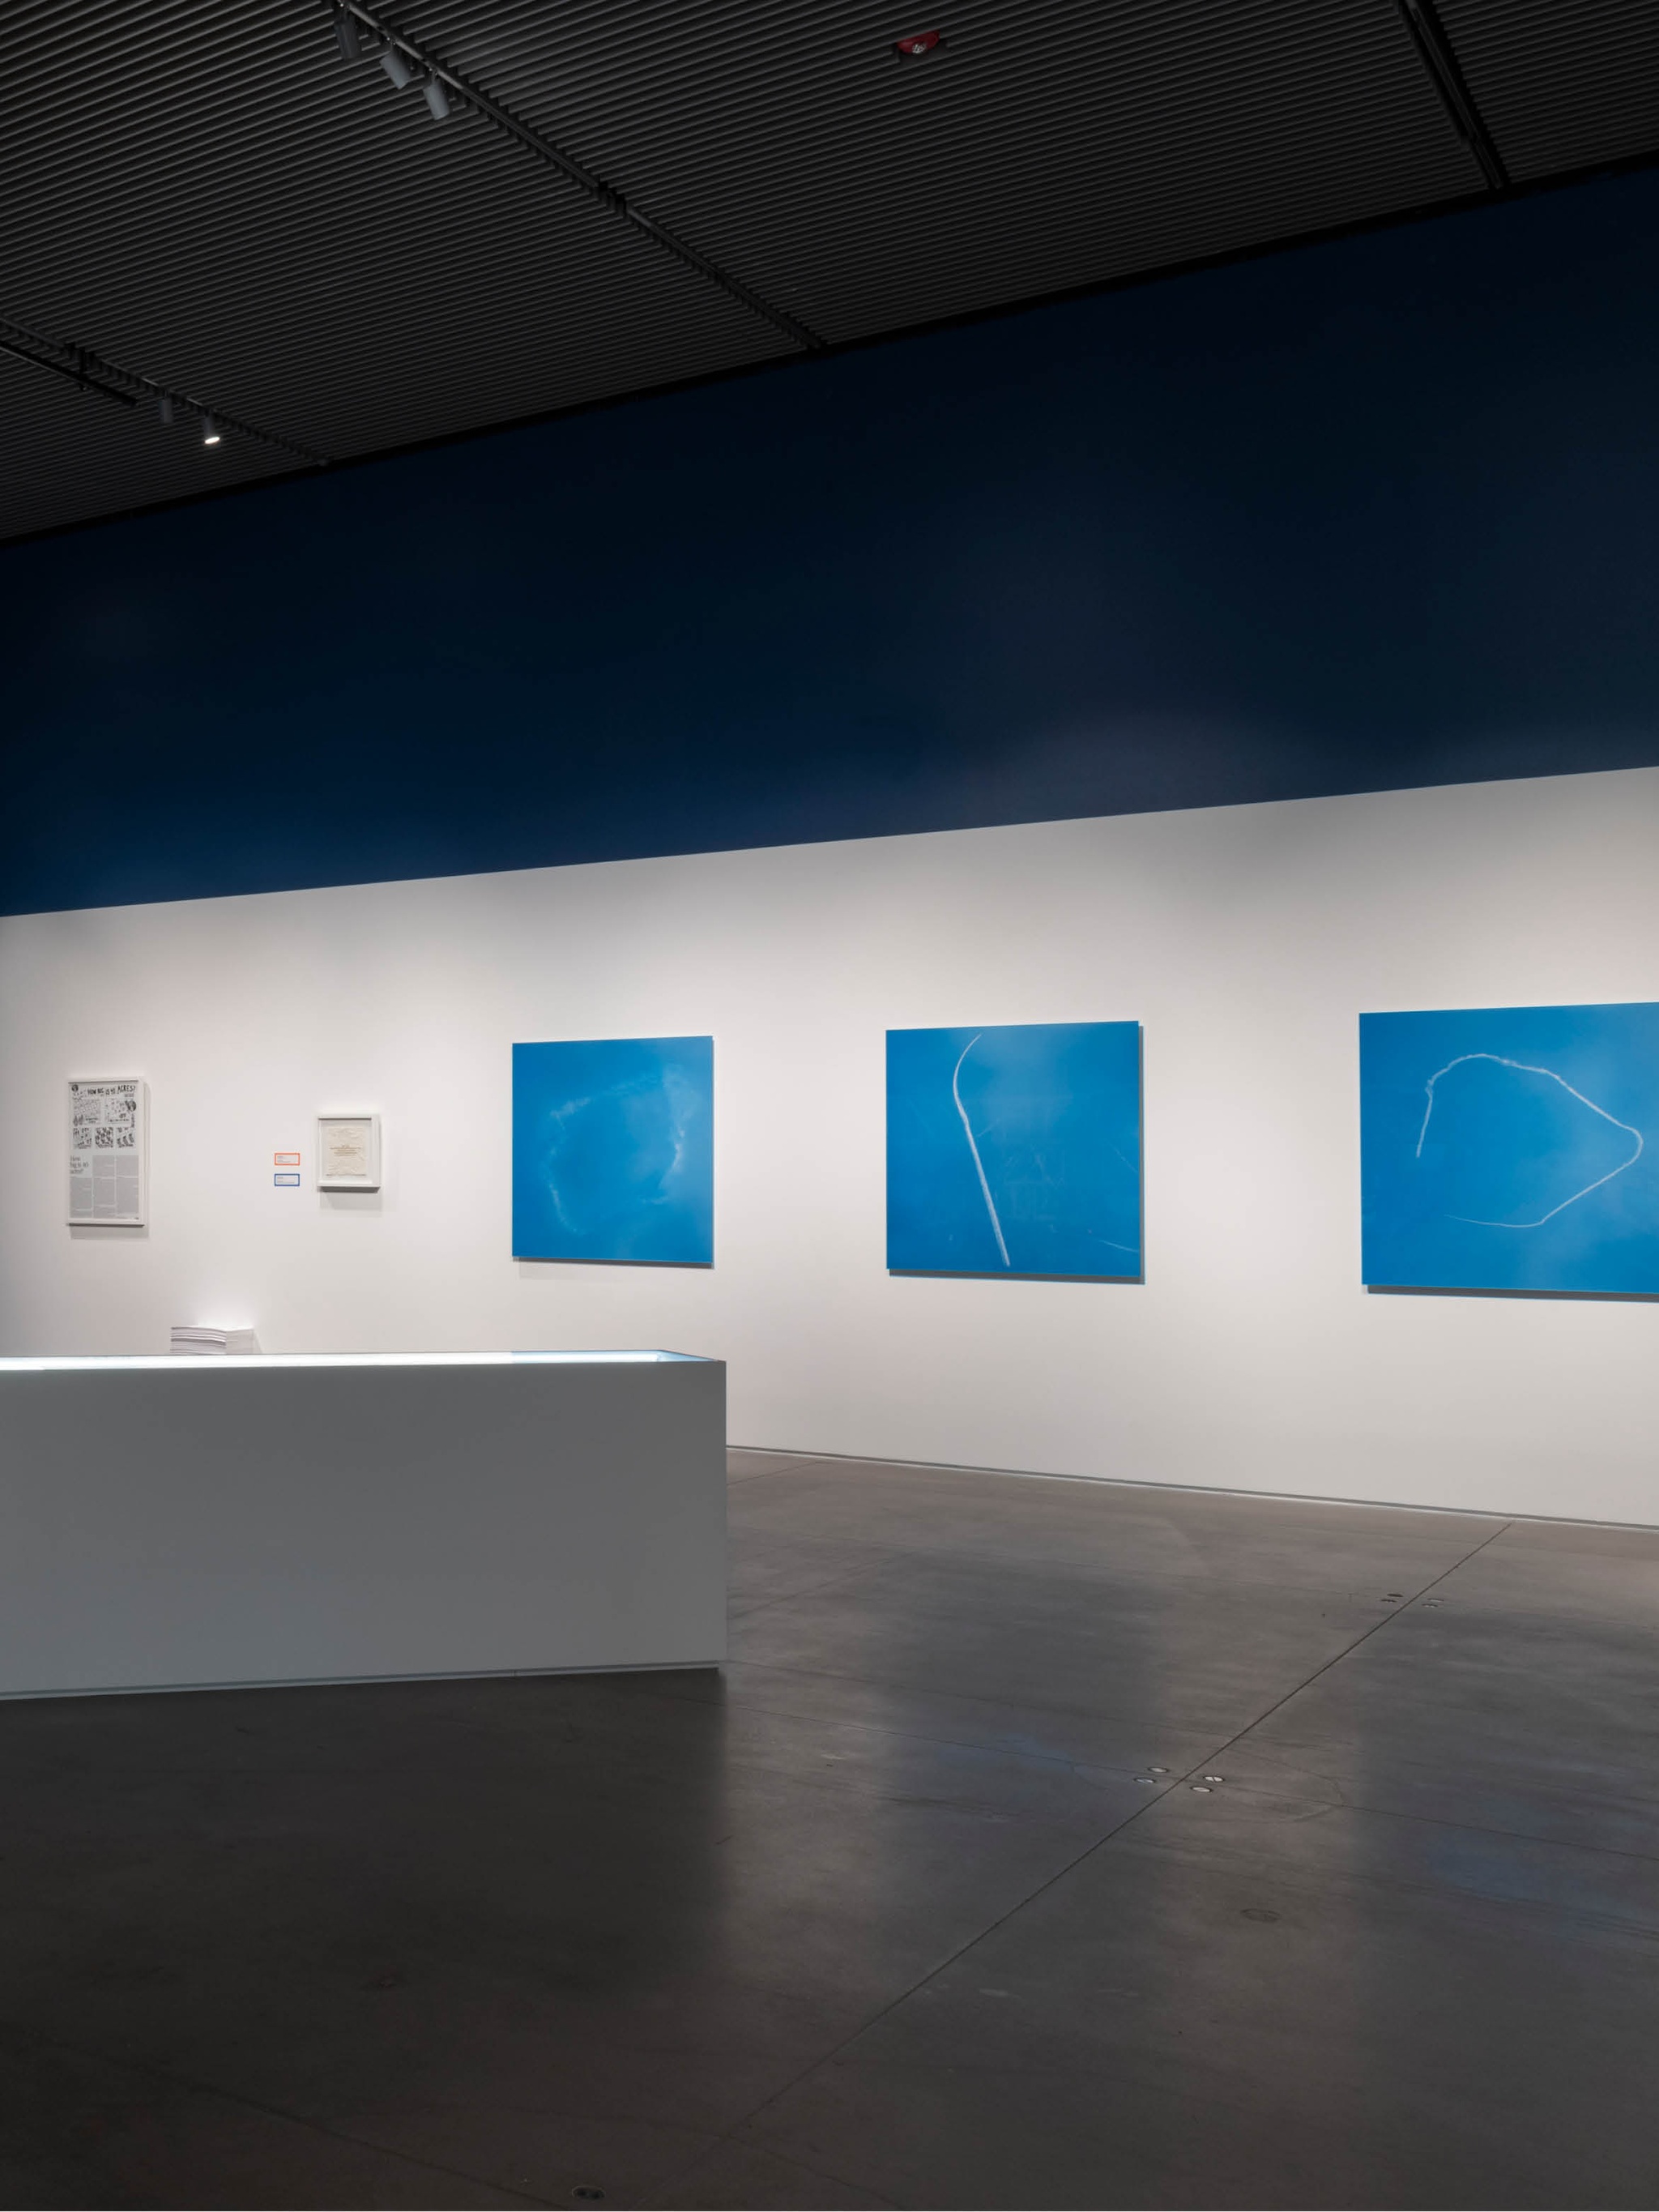 An art installation including a film and photographic prints. The film documents a skywriting performance and is projected on a screen that hangs from the ceiling on a diagonal angle to the left of the space. Along the wall on the right hang three photos in a row of the clouds formed by the skywriting against a bright blue sky. 